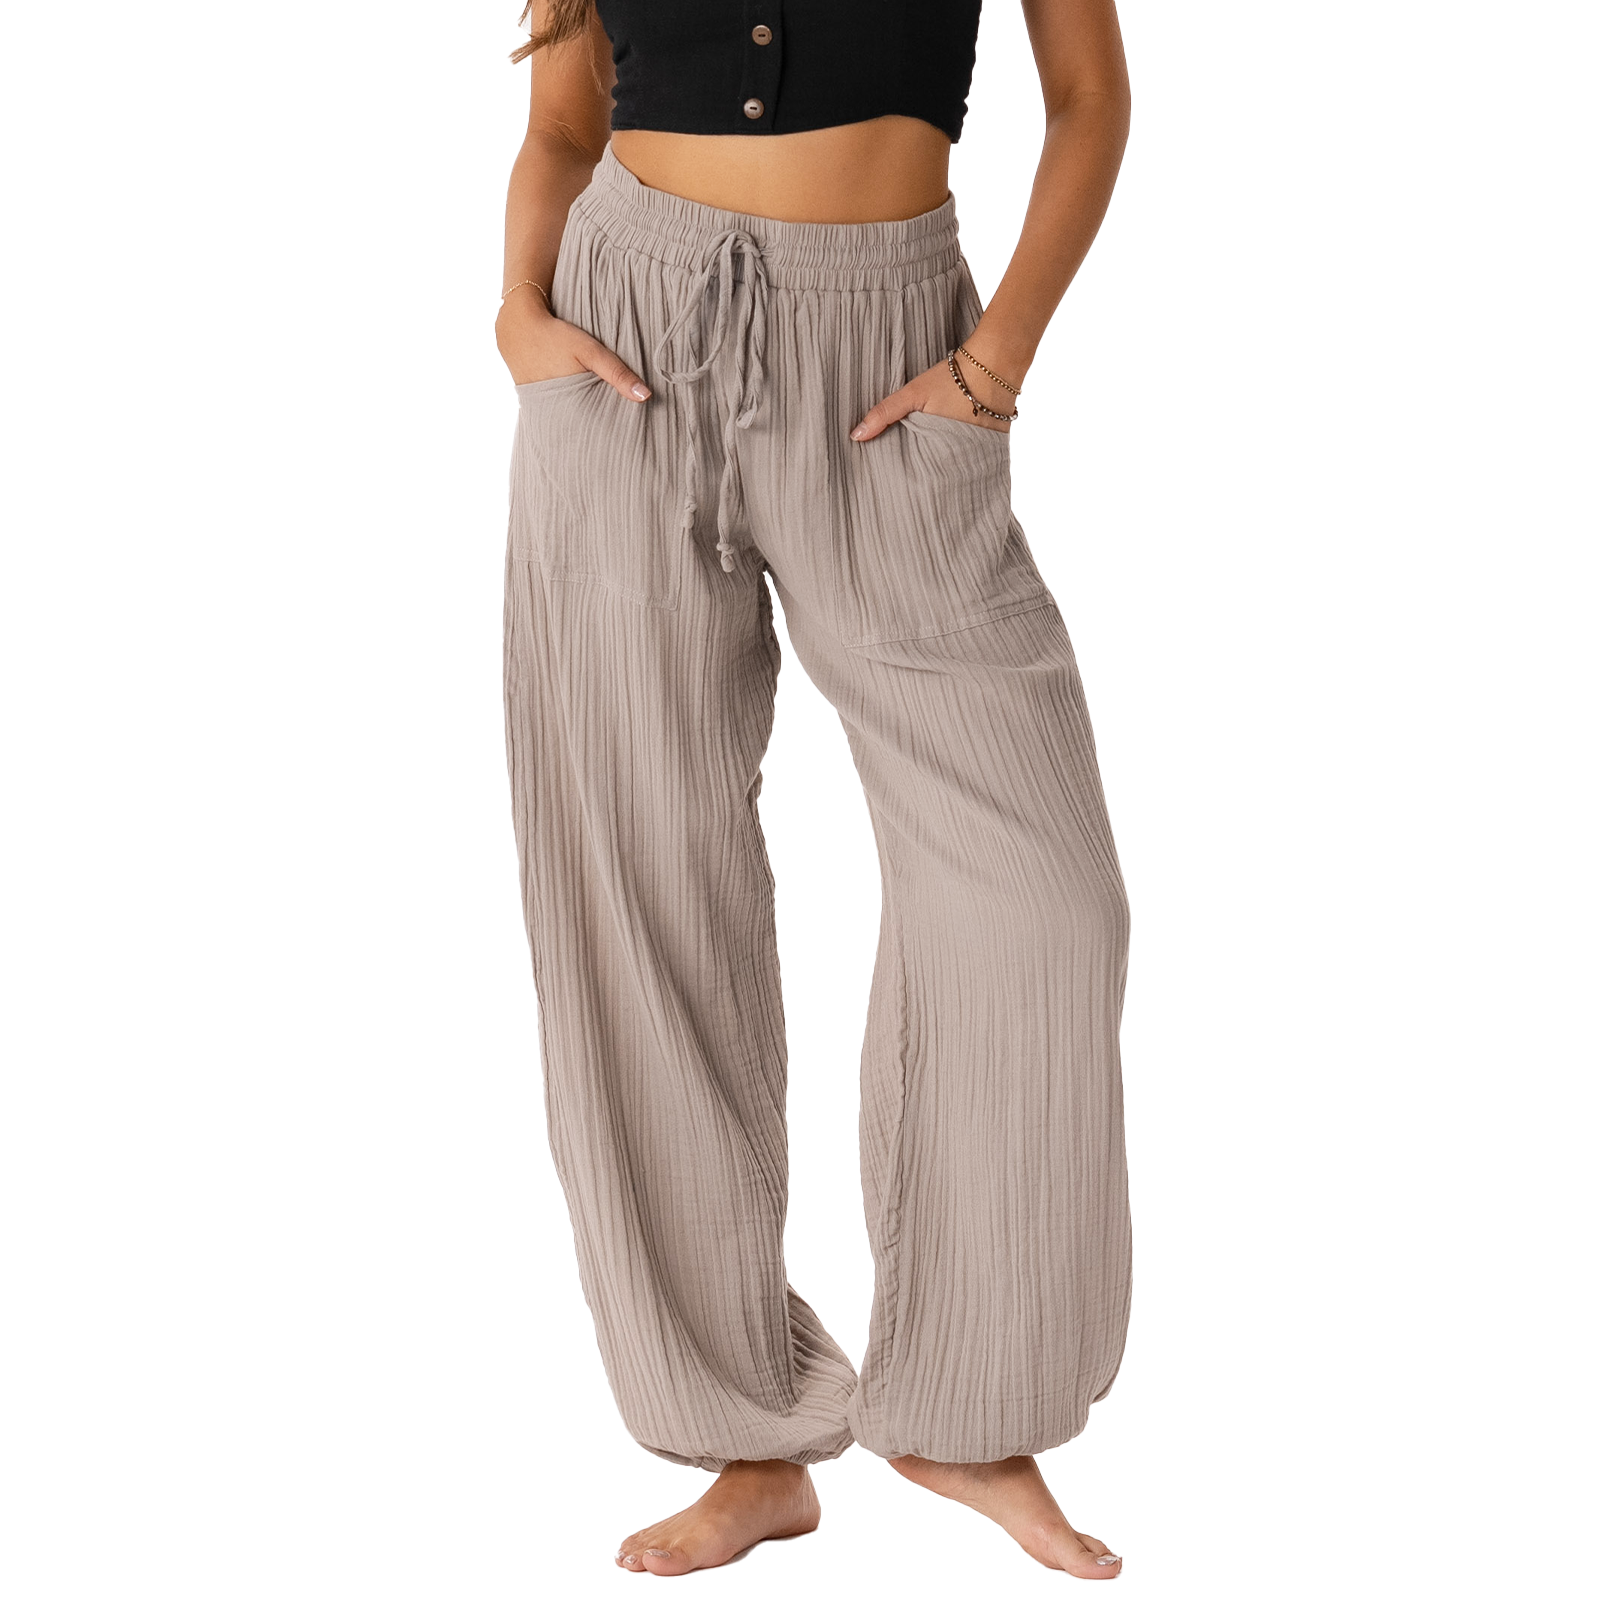 Model wearing stone colored harem pants with a drawstring waistband